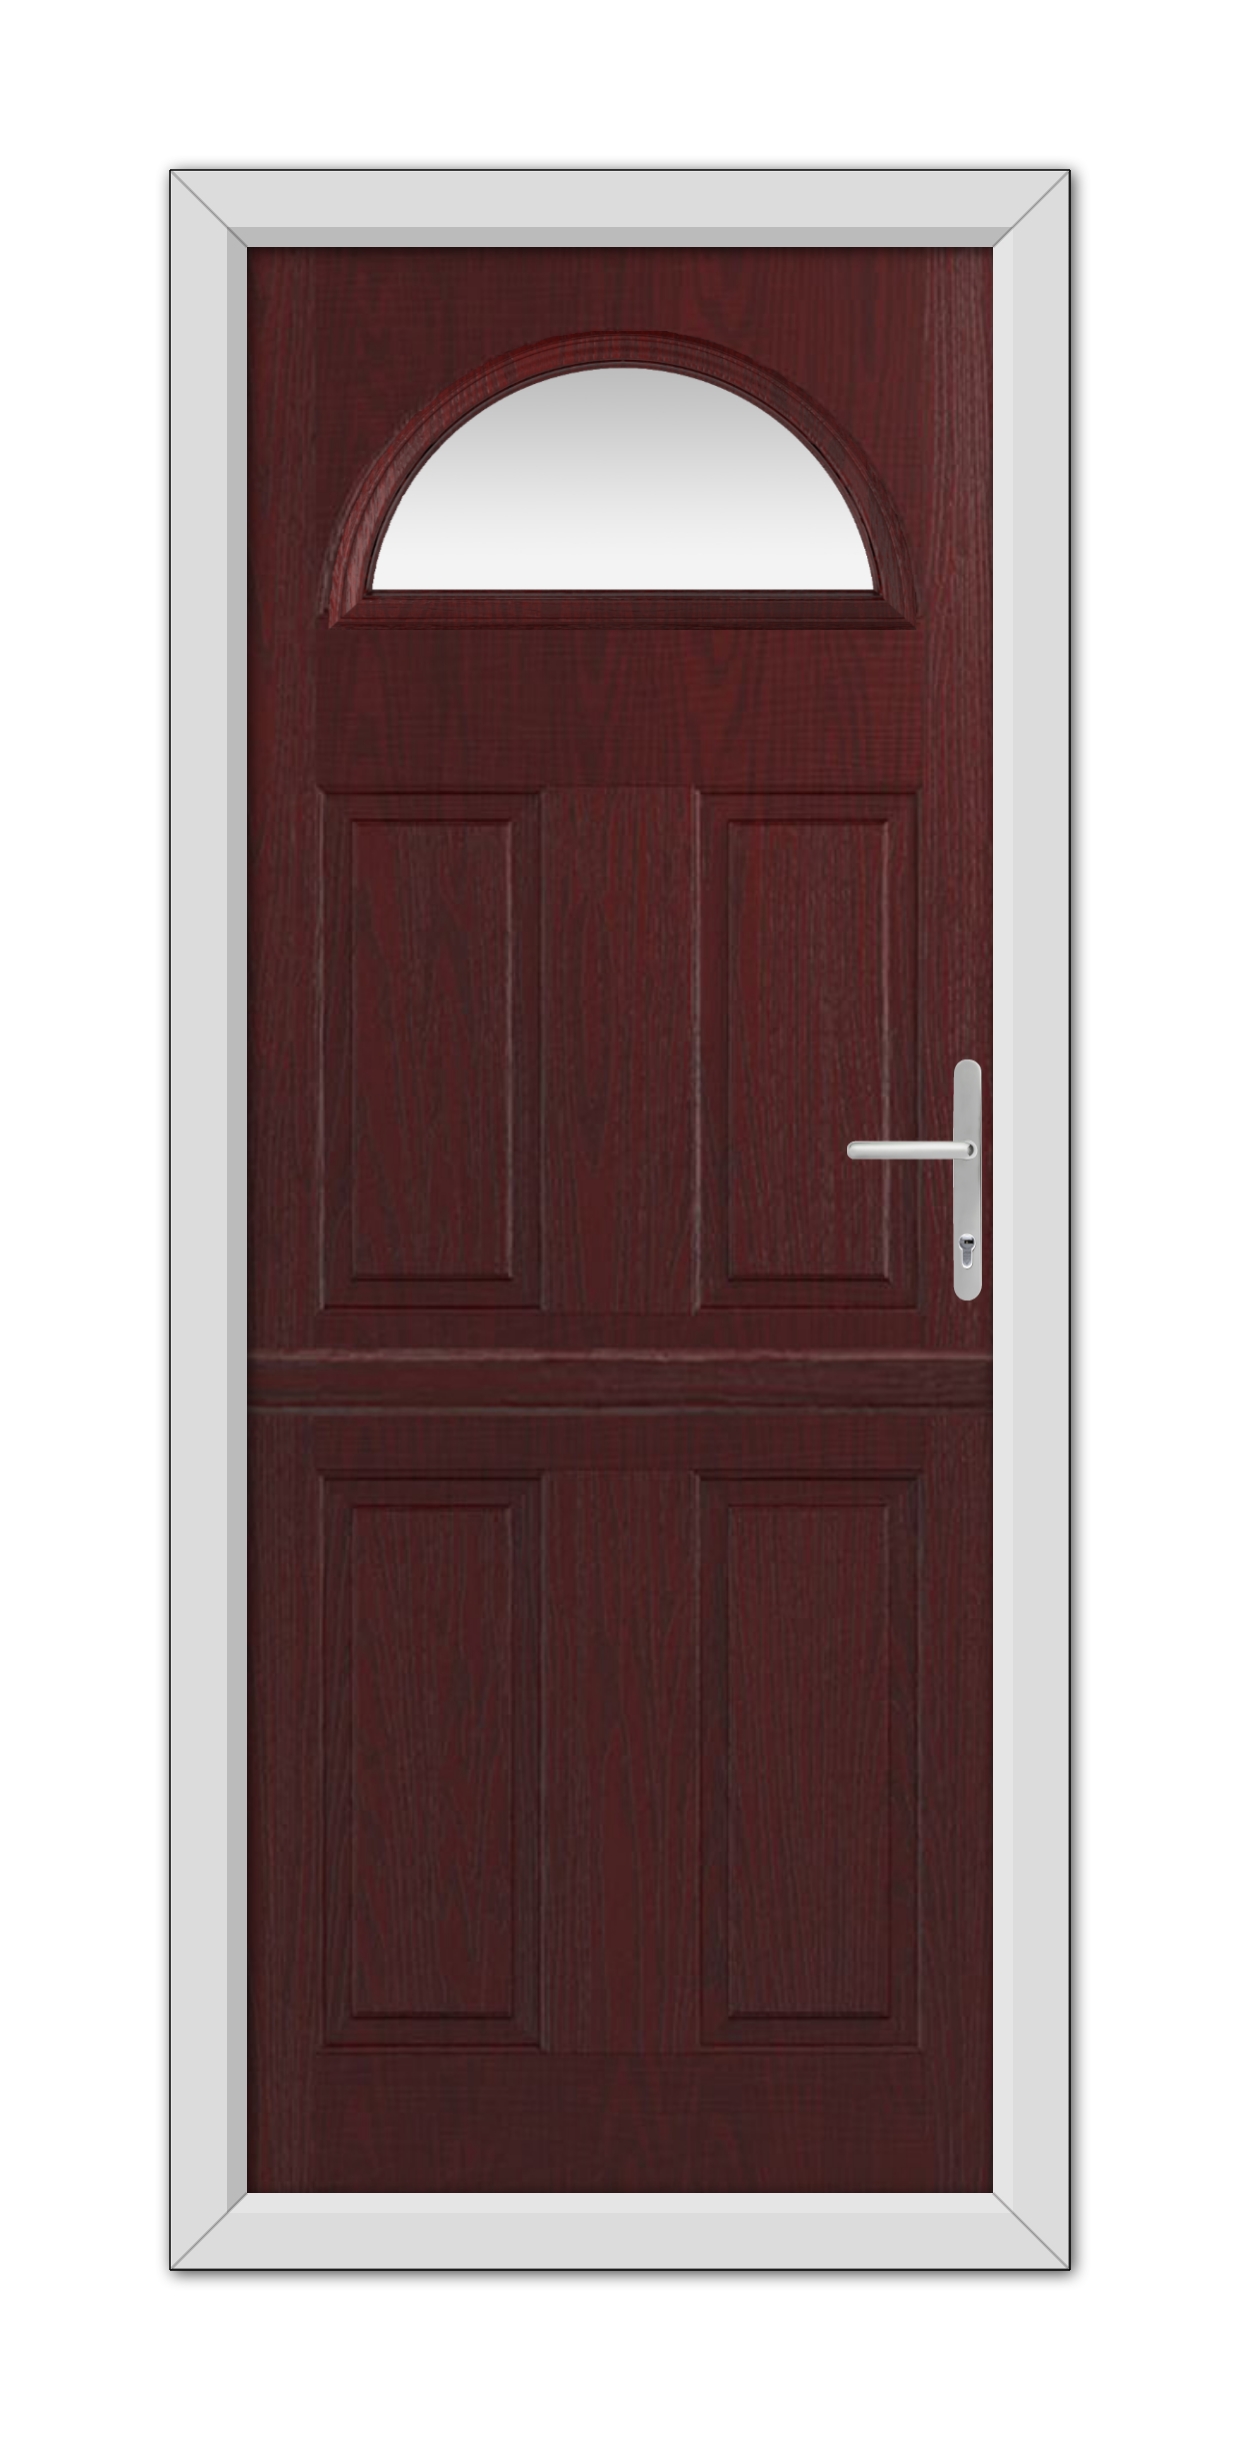 A closed Rosewood Winslow 1 Stable Composite Door 48mm Timber Core with a semicircular glass panel at the top, framed in white, featuring a modern silver handle on the right.